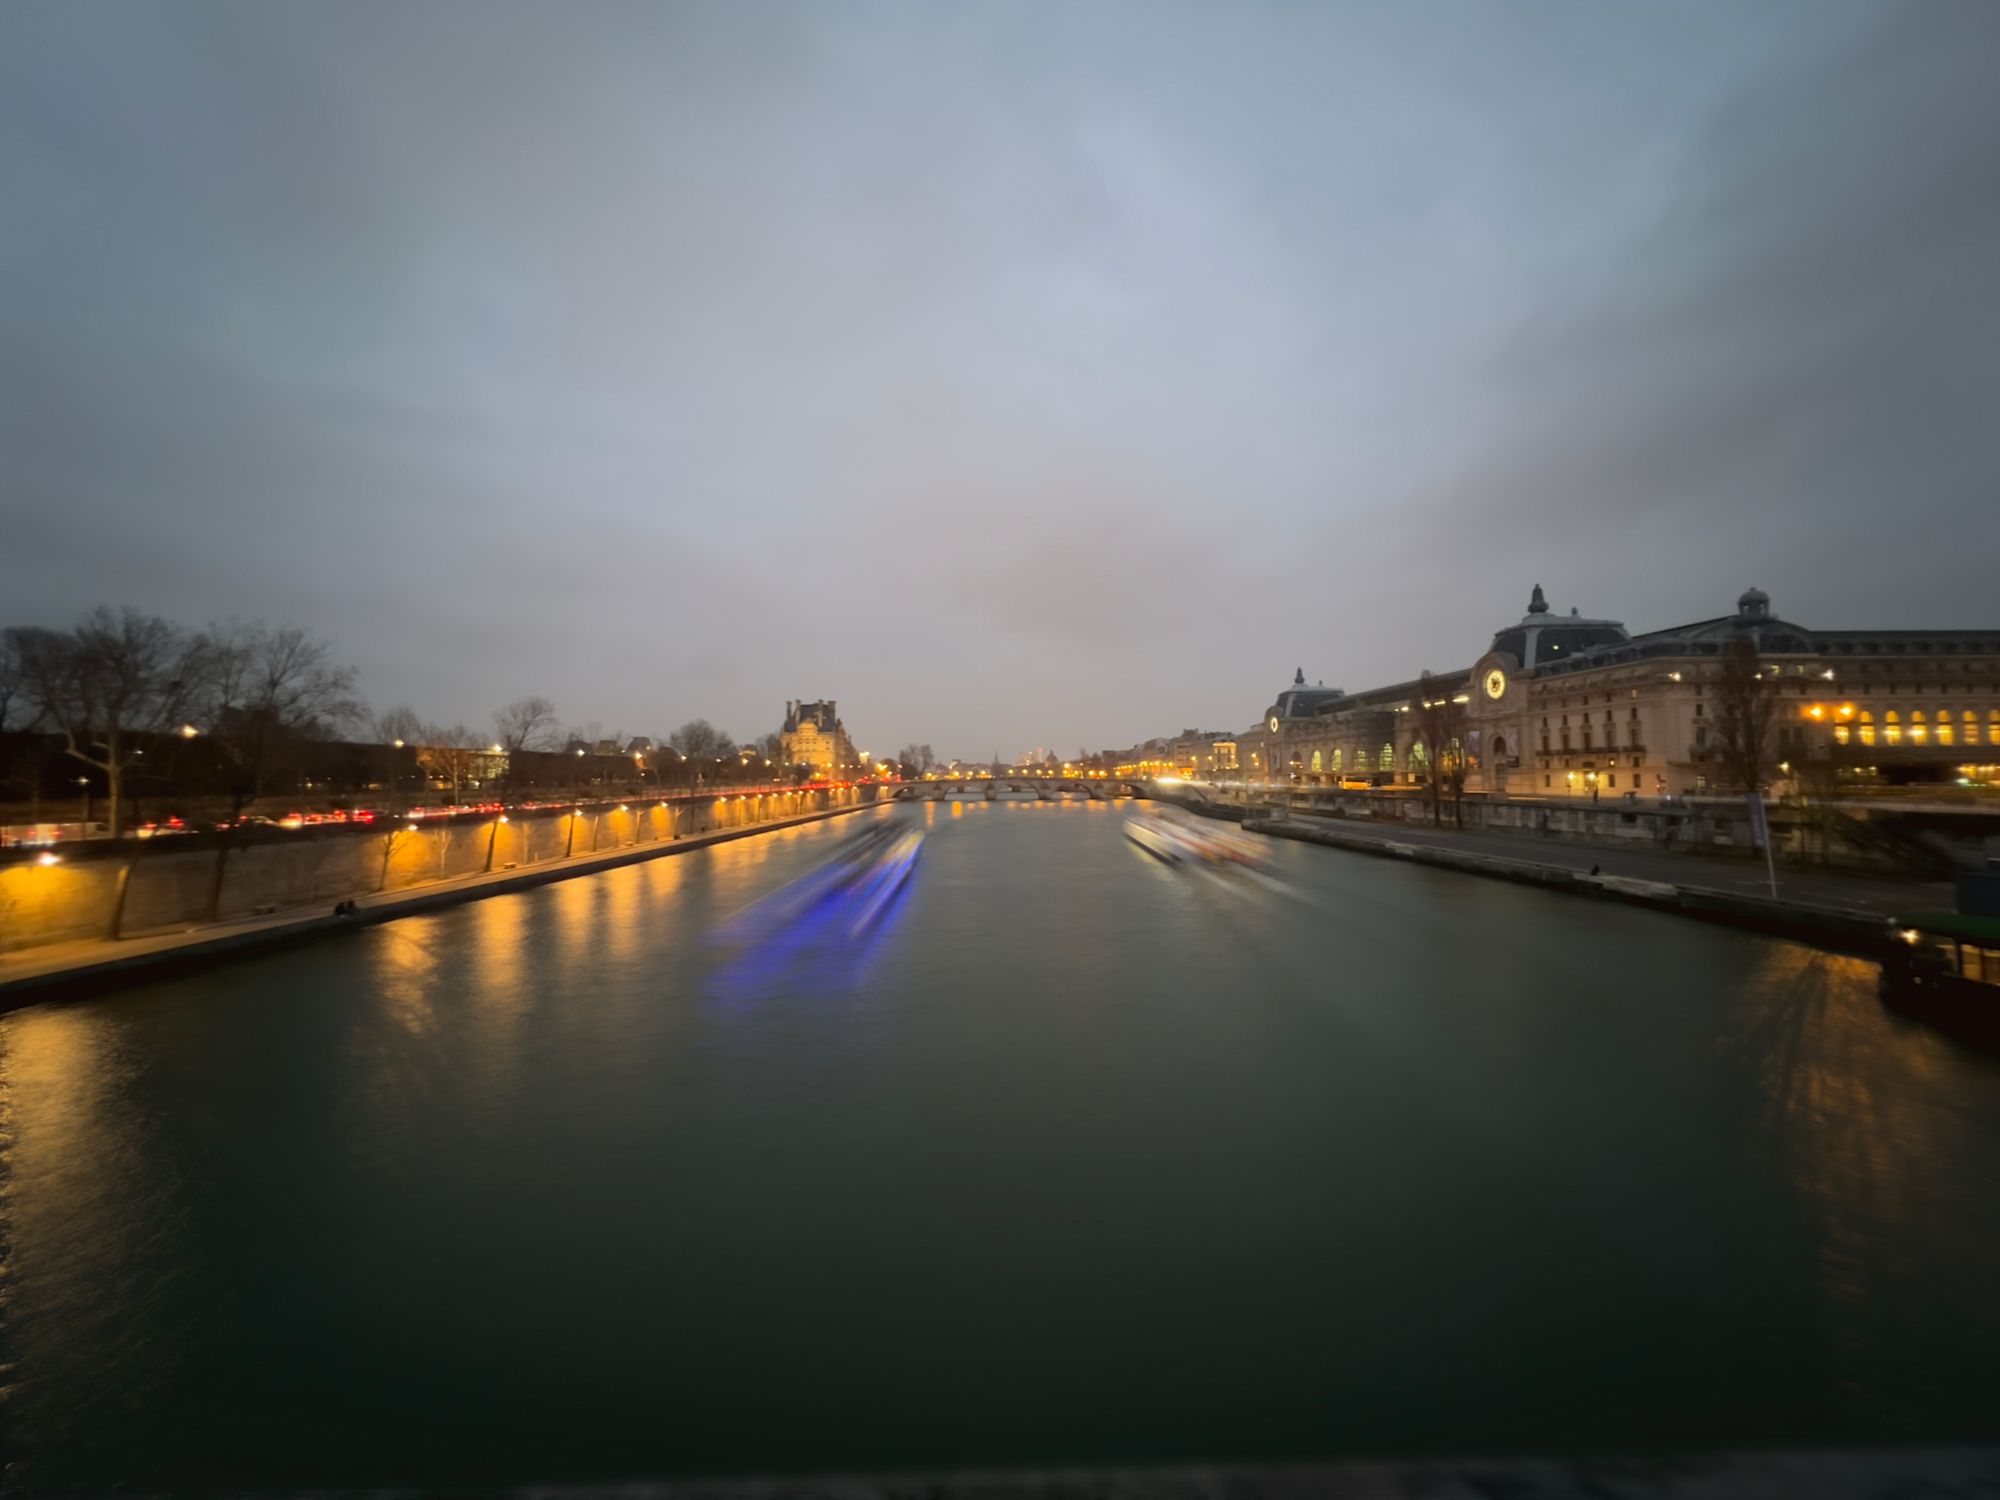 The Seine at dusk from a bridge looking towards Musée d’Orsay. Boats passing make pretty light trails.